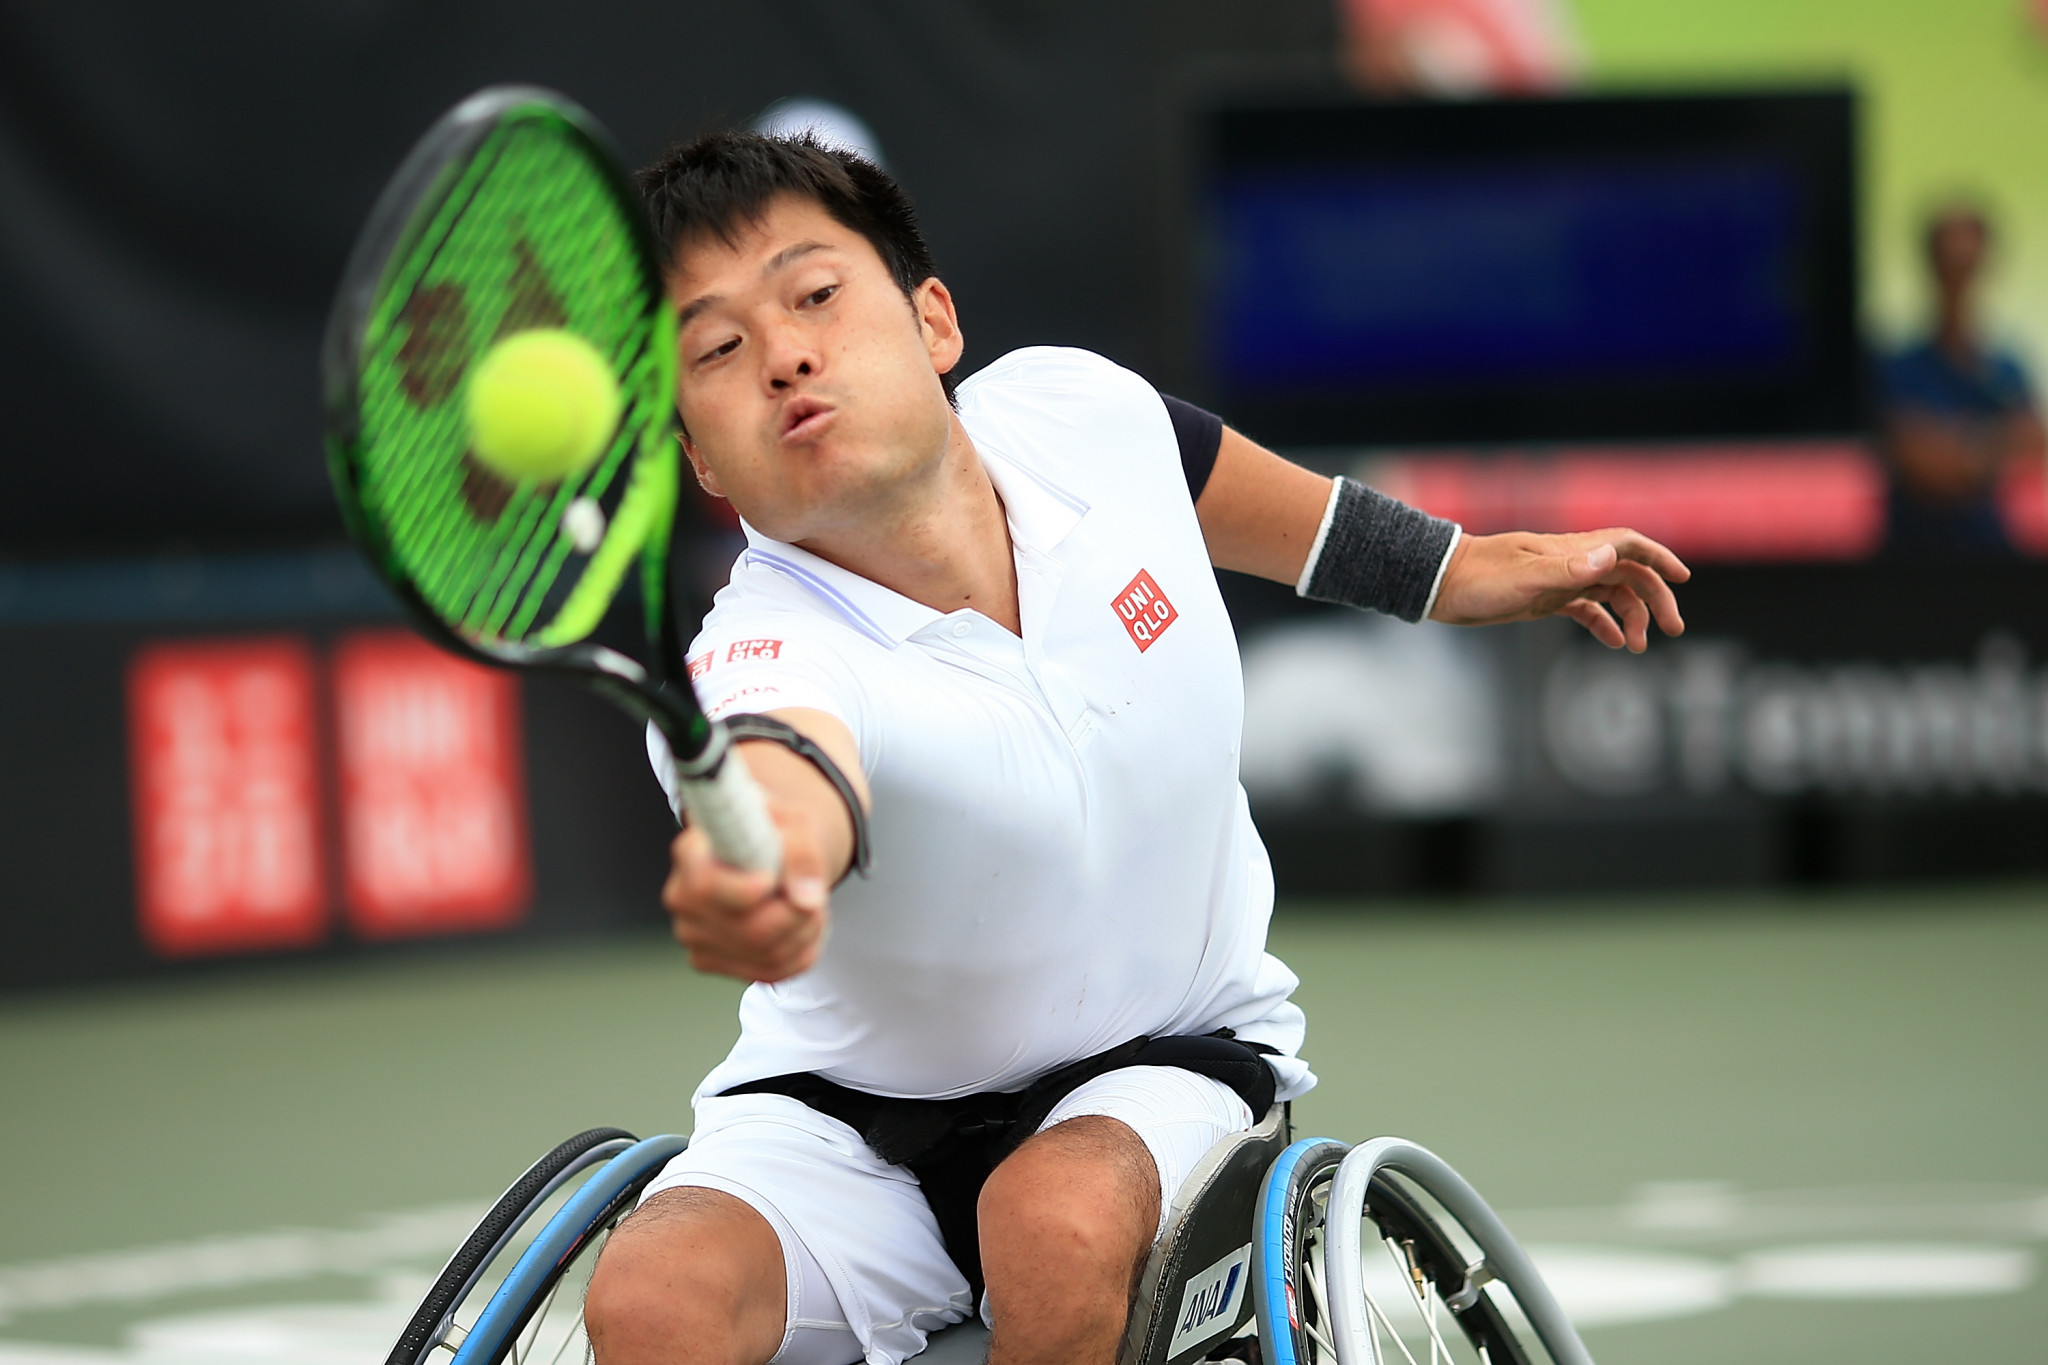 Japan's Shingo Kunieda made it through to the men's singles final by winning the only singles match on today ©Getty Images